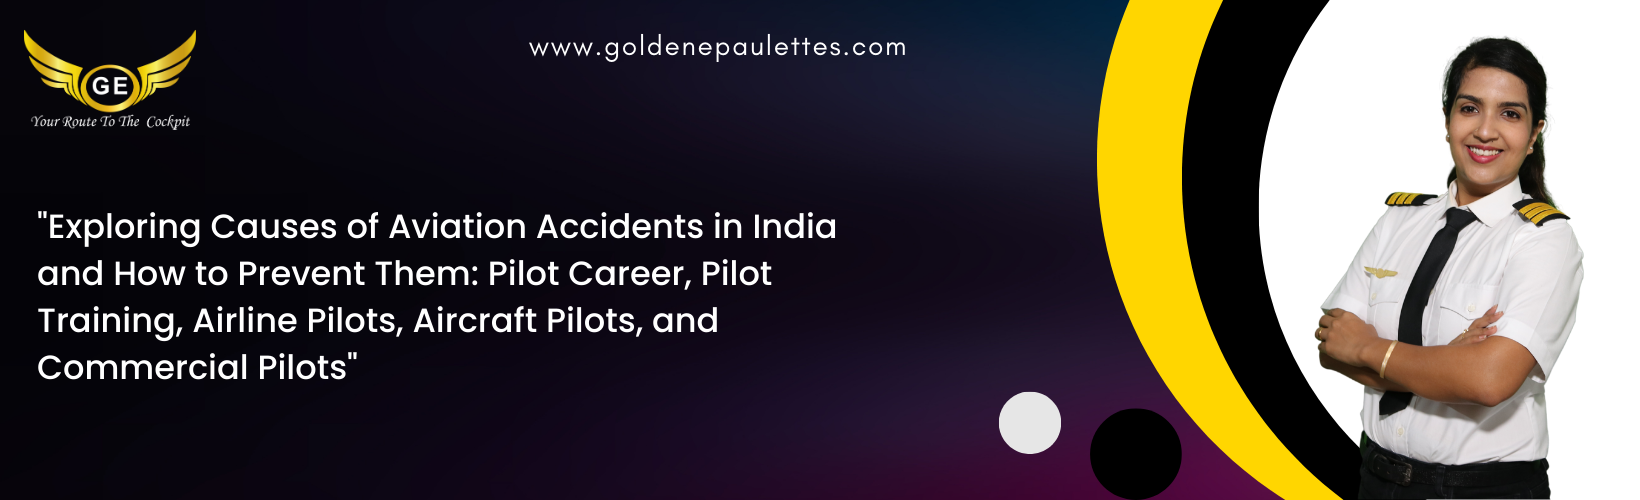 Aviation Accidents in India